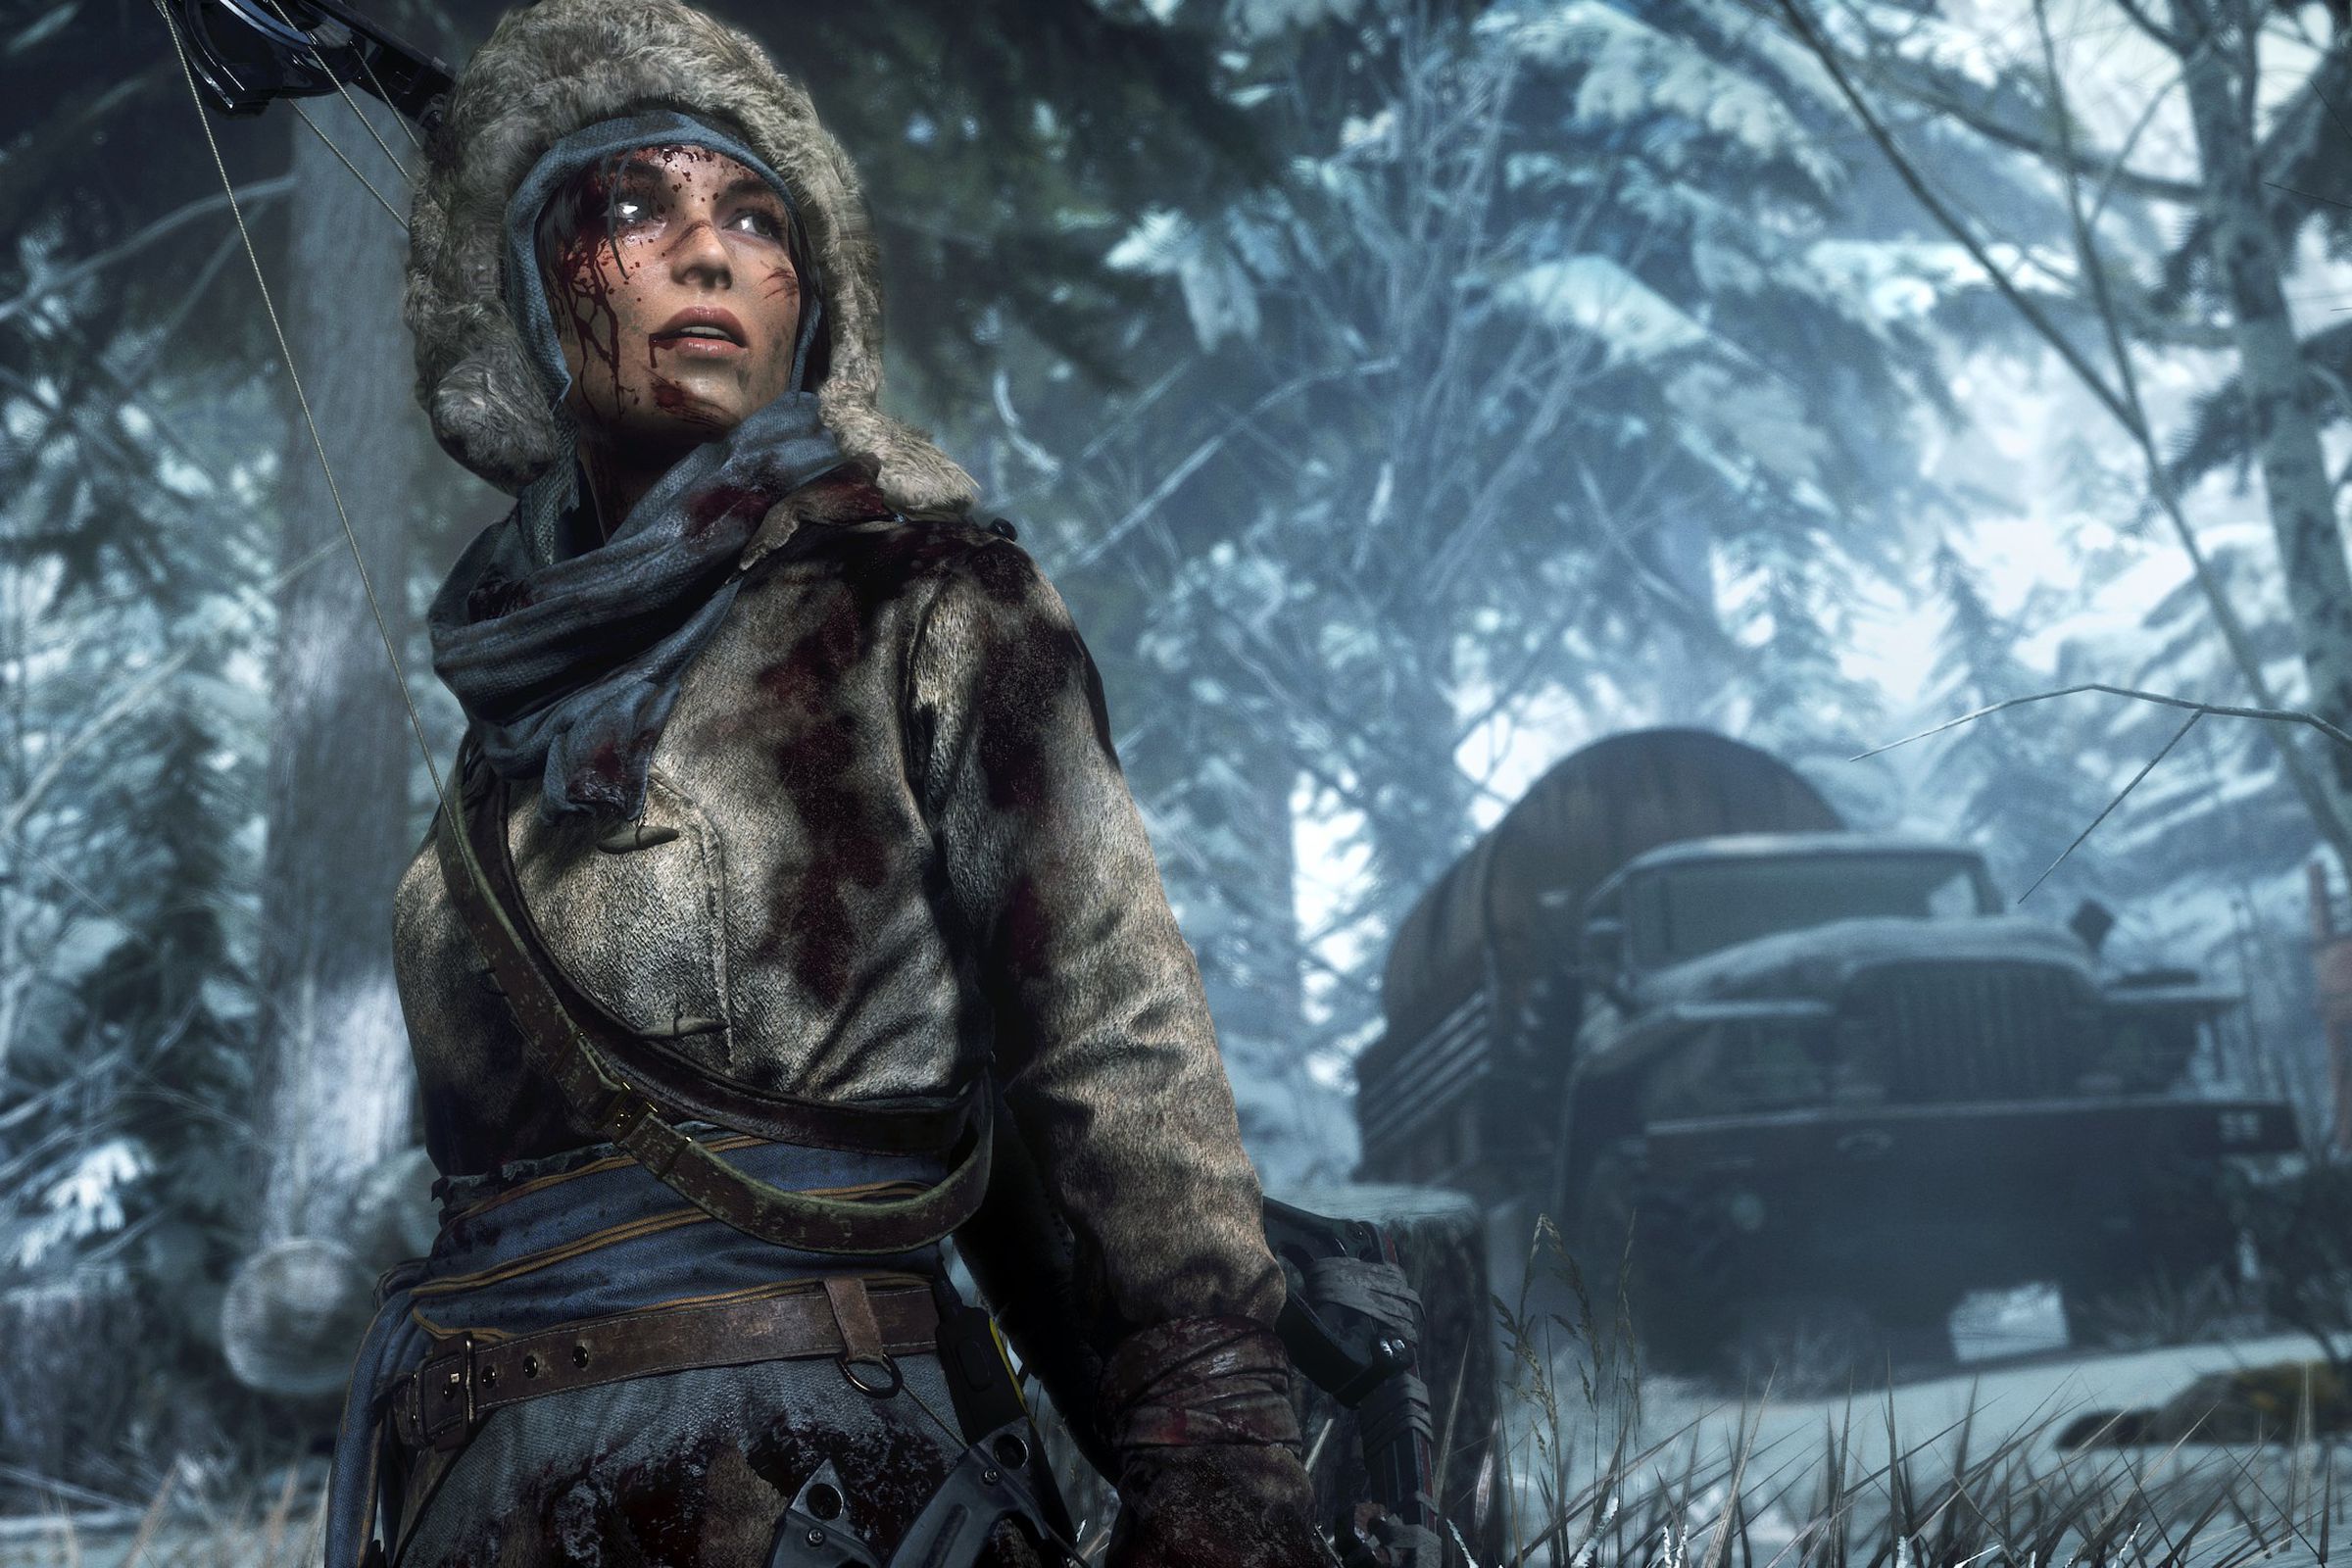 Screenshot from Rise of the Tomb Raider featuring Lara Croft covered in blood and bundled in a fur coat in a frozen wilderness